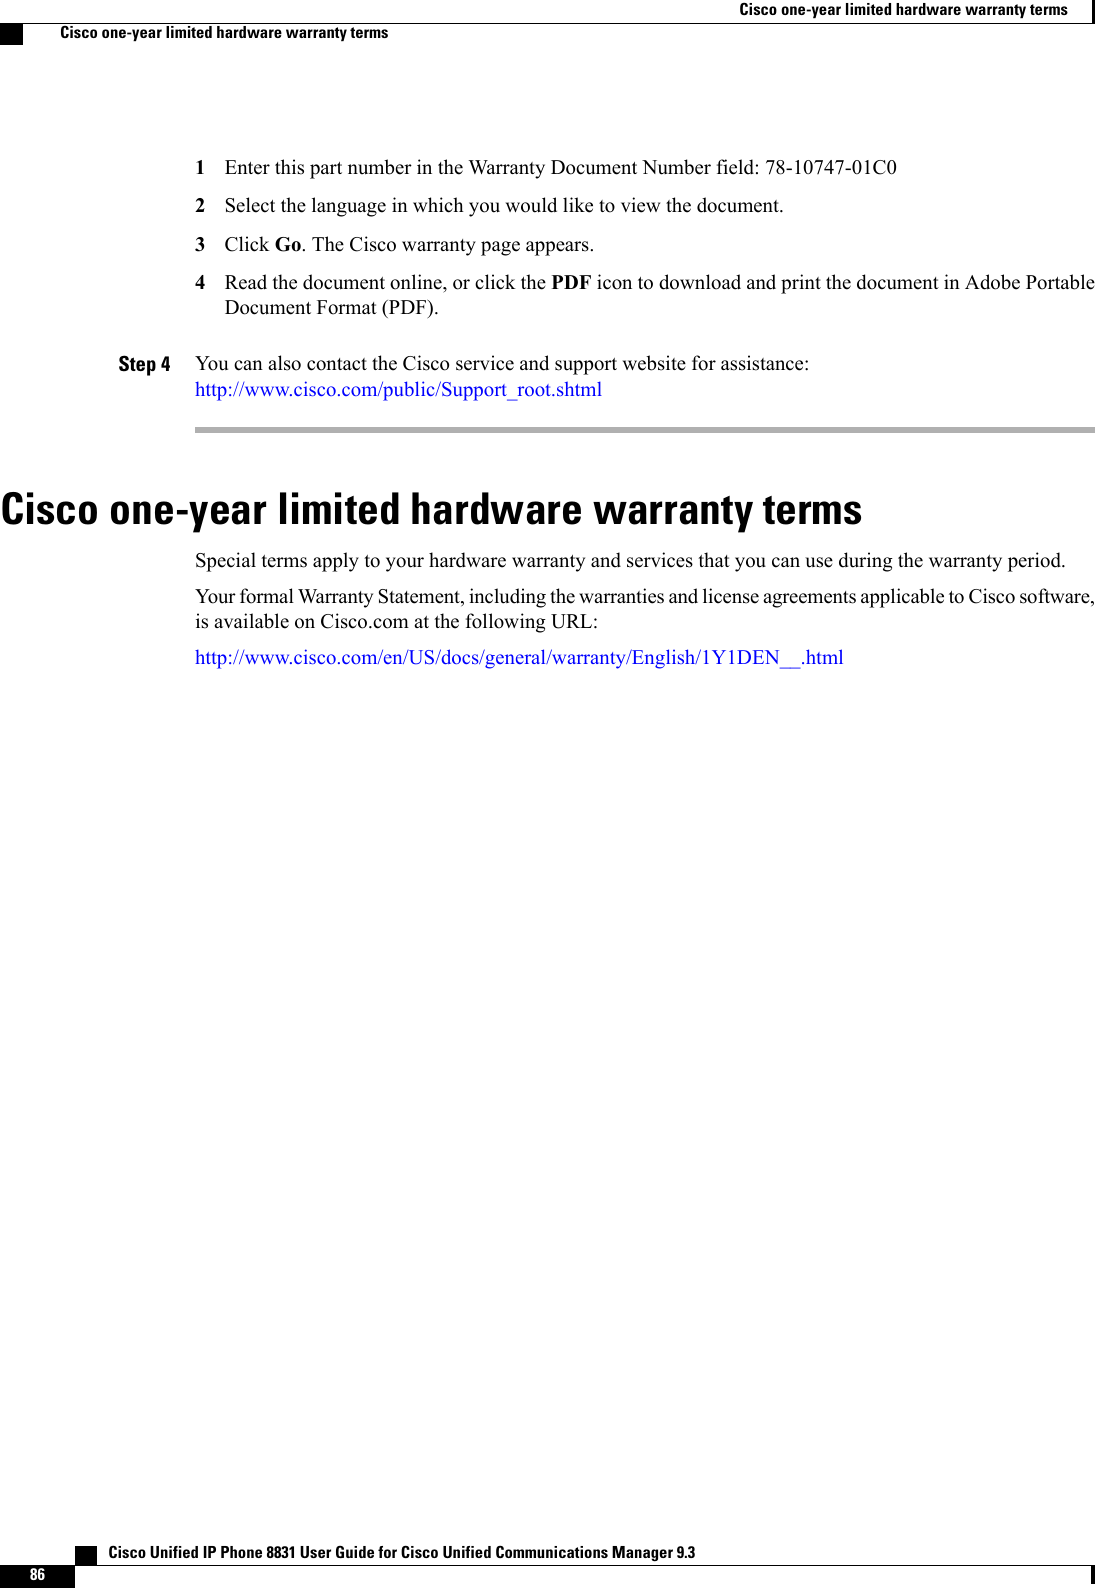 Enter this part number in the Warranty Document Number field: 78-10747-01C012Select the language in which you would like to view the document.3Click Go. The Cisco warranty page appears.4Read the document online, or click the PDF icon to download and print the document in Adobe PortableDocument Format (PDF).Step 4 You can also contact the Cisco service and support website for assistance:http://www.cisco.com/public/Support_root.shtmlCisco one-year limited hardware warranty termsSpecial terms apply to your hardware warranty and services that you can use during the warranty period.Your formal Warranty Statement, including the warranties and license agreements applicable to Cisco software,is available on Cisco.com at the following URL:http://www.cisco.com/en/US/docs/general/warranty/English/1Y1DEN__.html   Cisco Unified IP Phone 8831 User Guide for Cisco Unified Communications Manager 9.386Cisco one-year limited hardware warranty termsCisco one-year limited hardware warranty terms